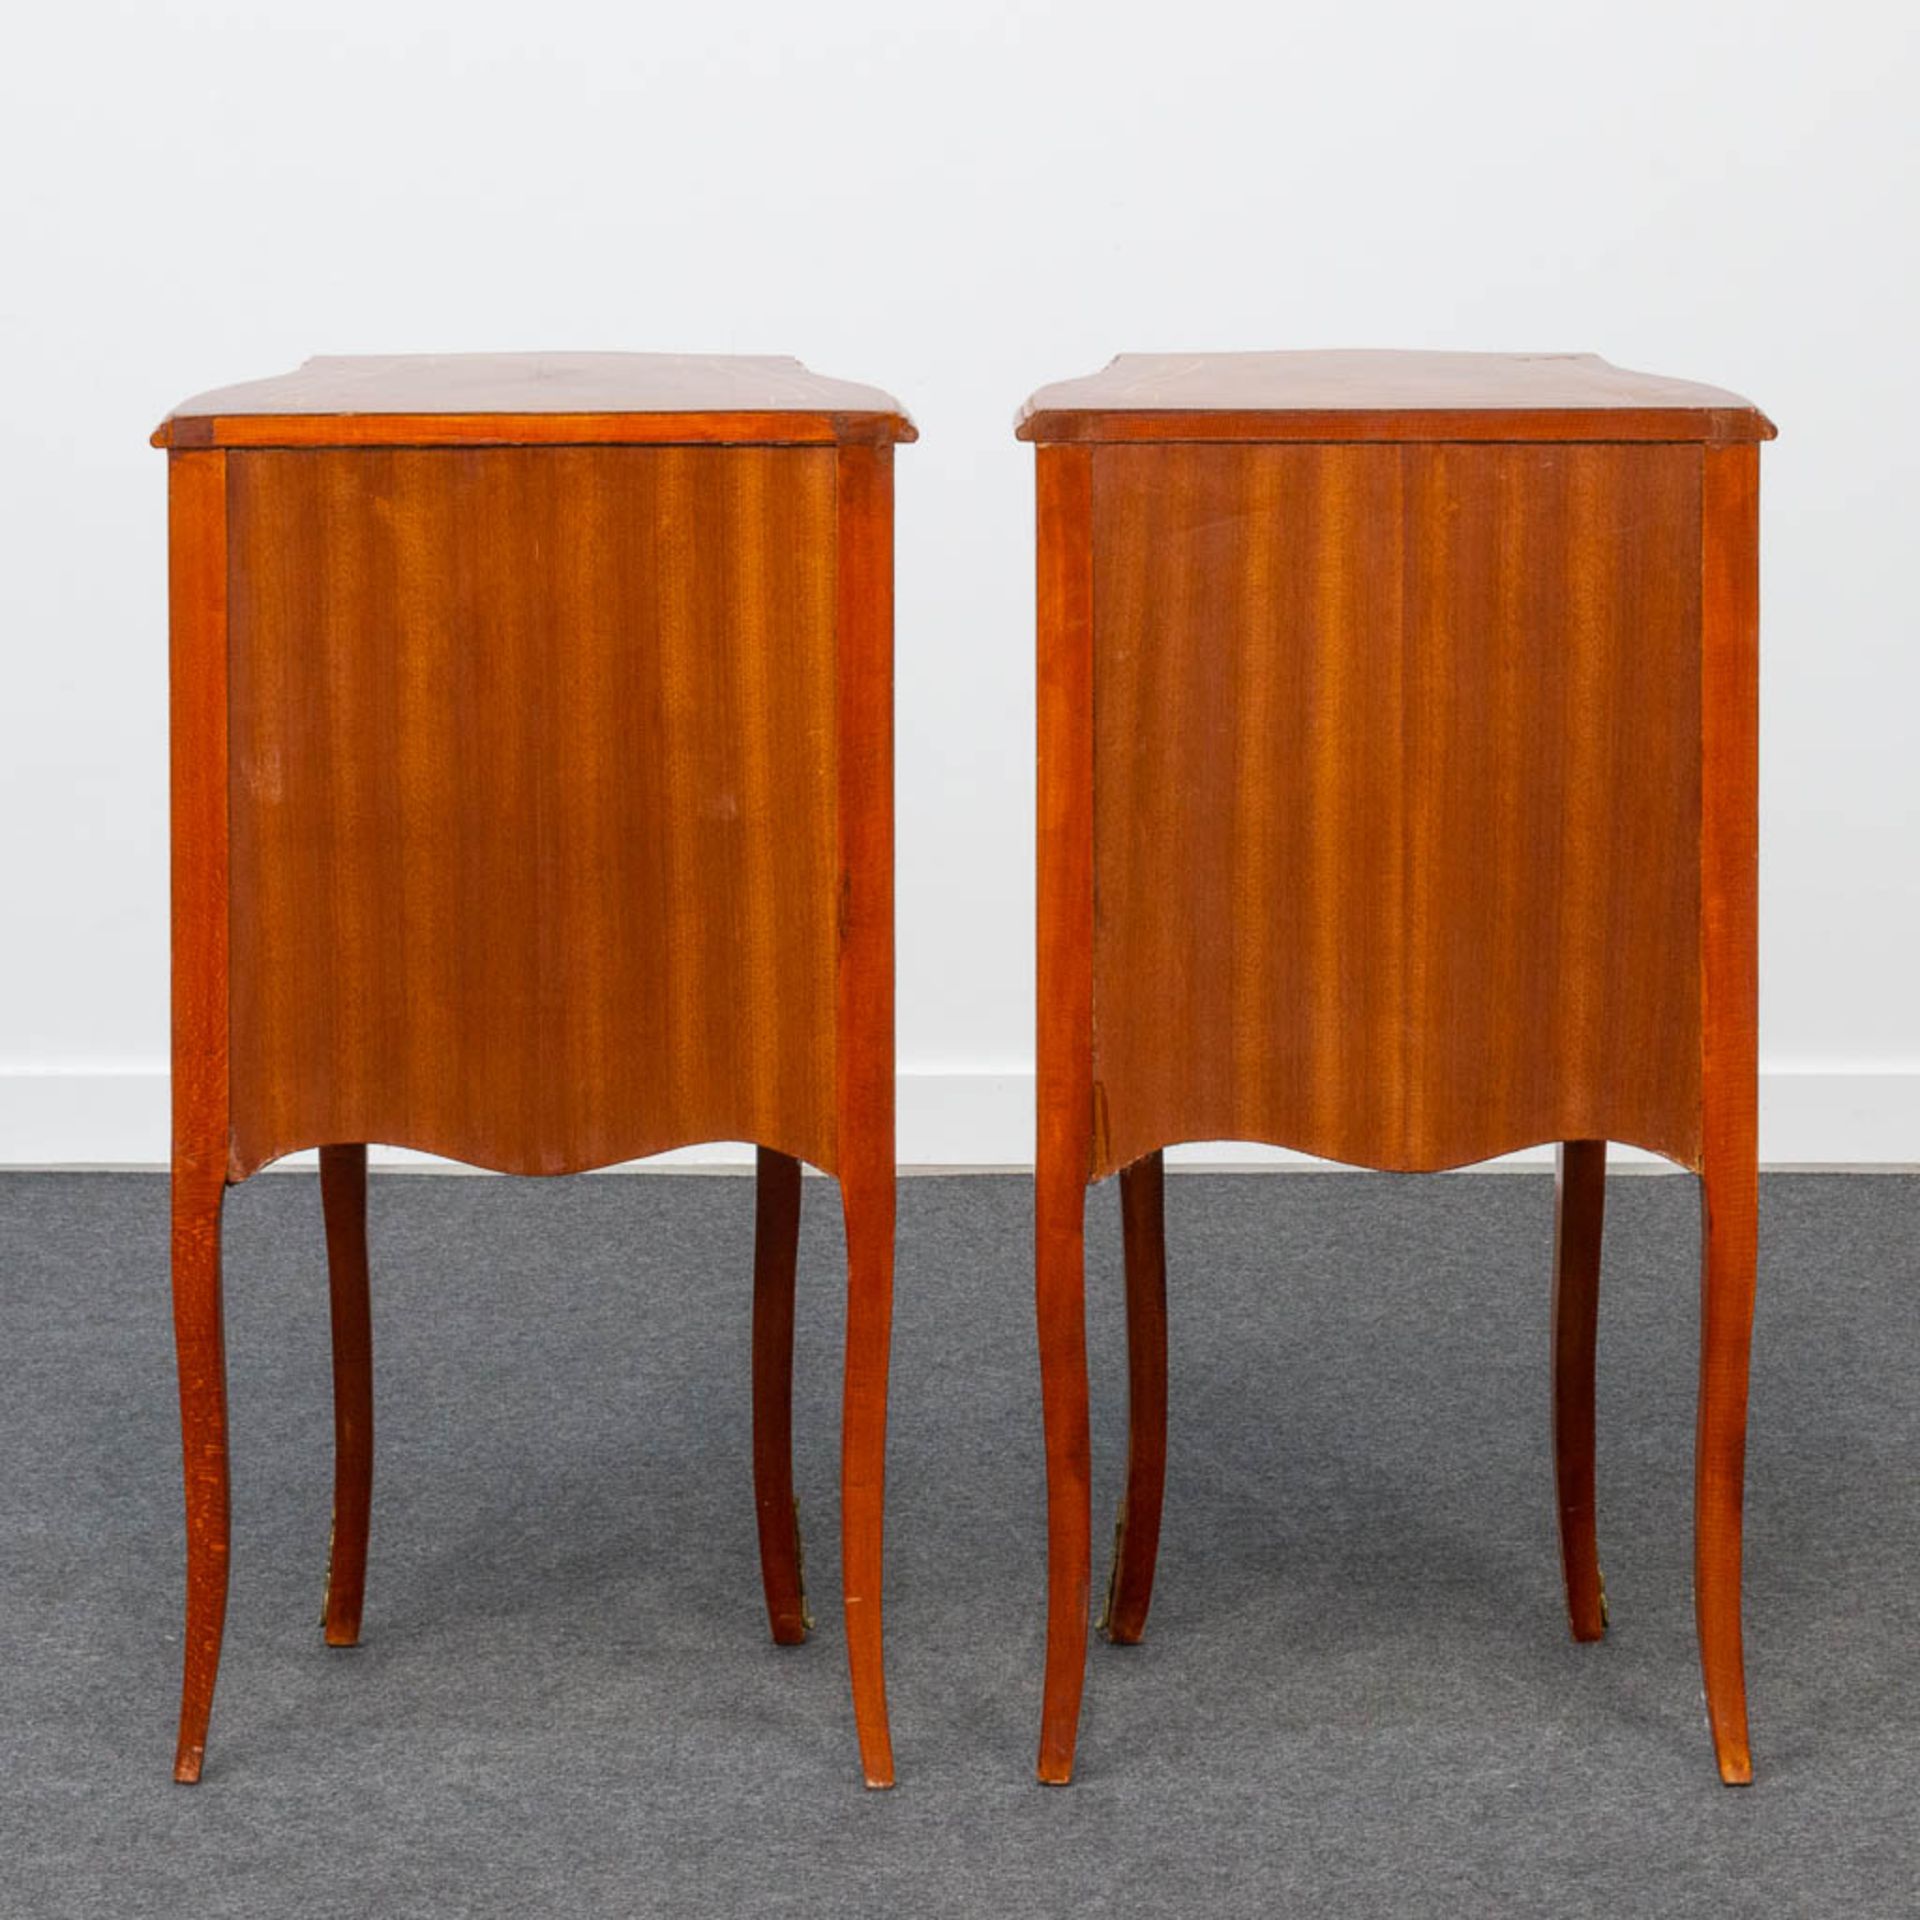 A pair of bronze mounted nightstands, inlaid with marquetry. Second half of the 20th century. - Image 5 of 22